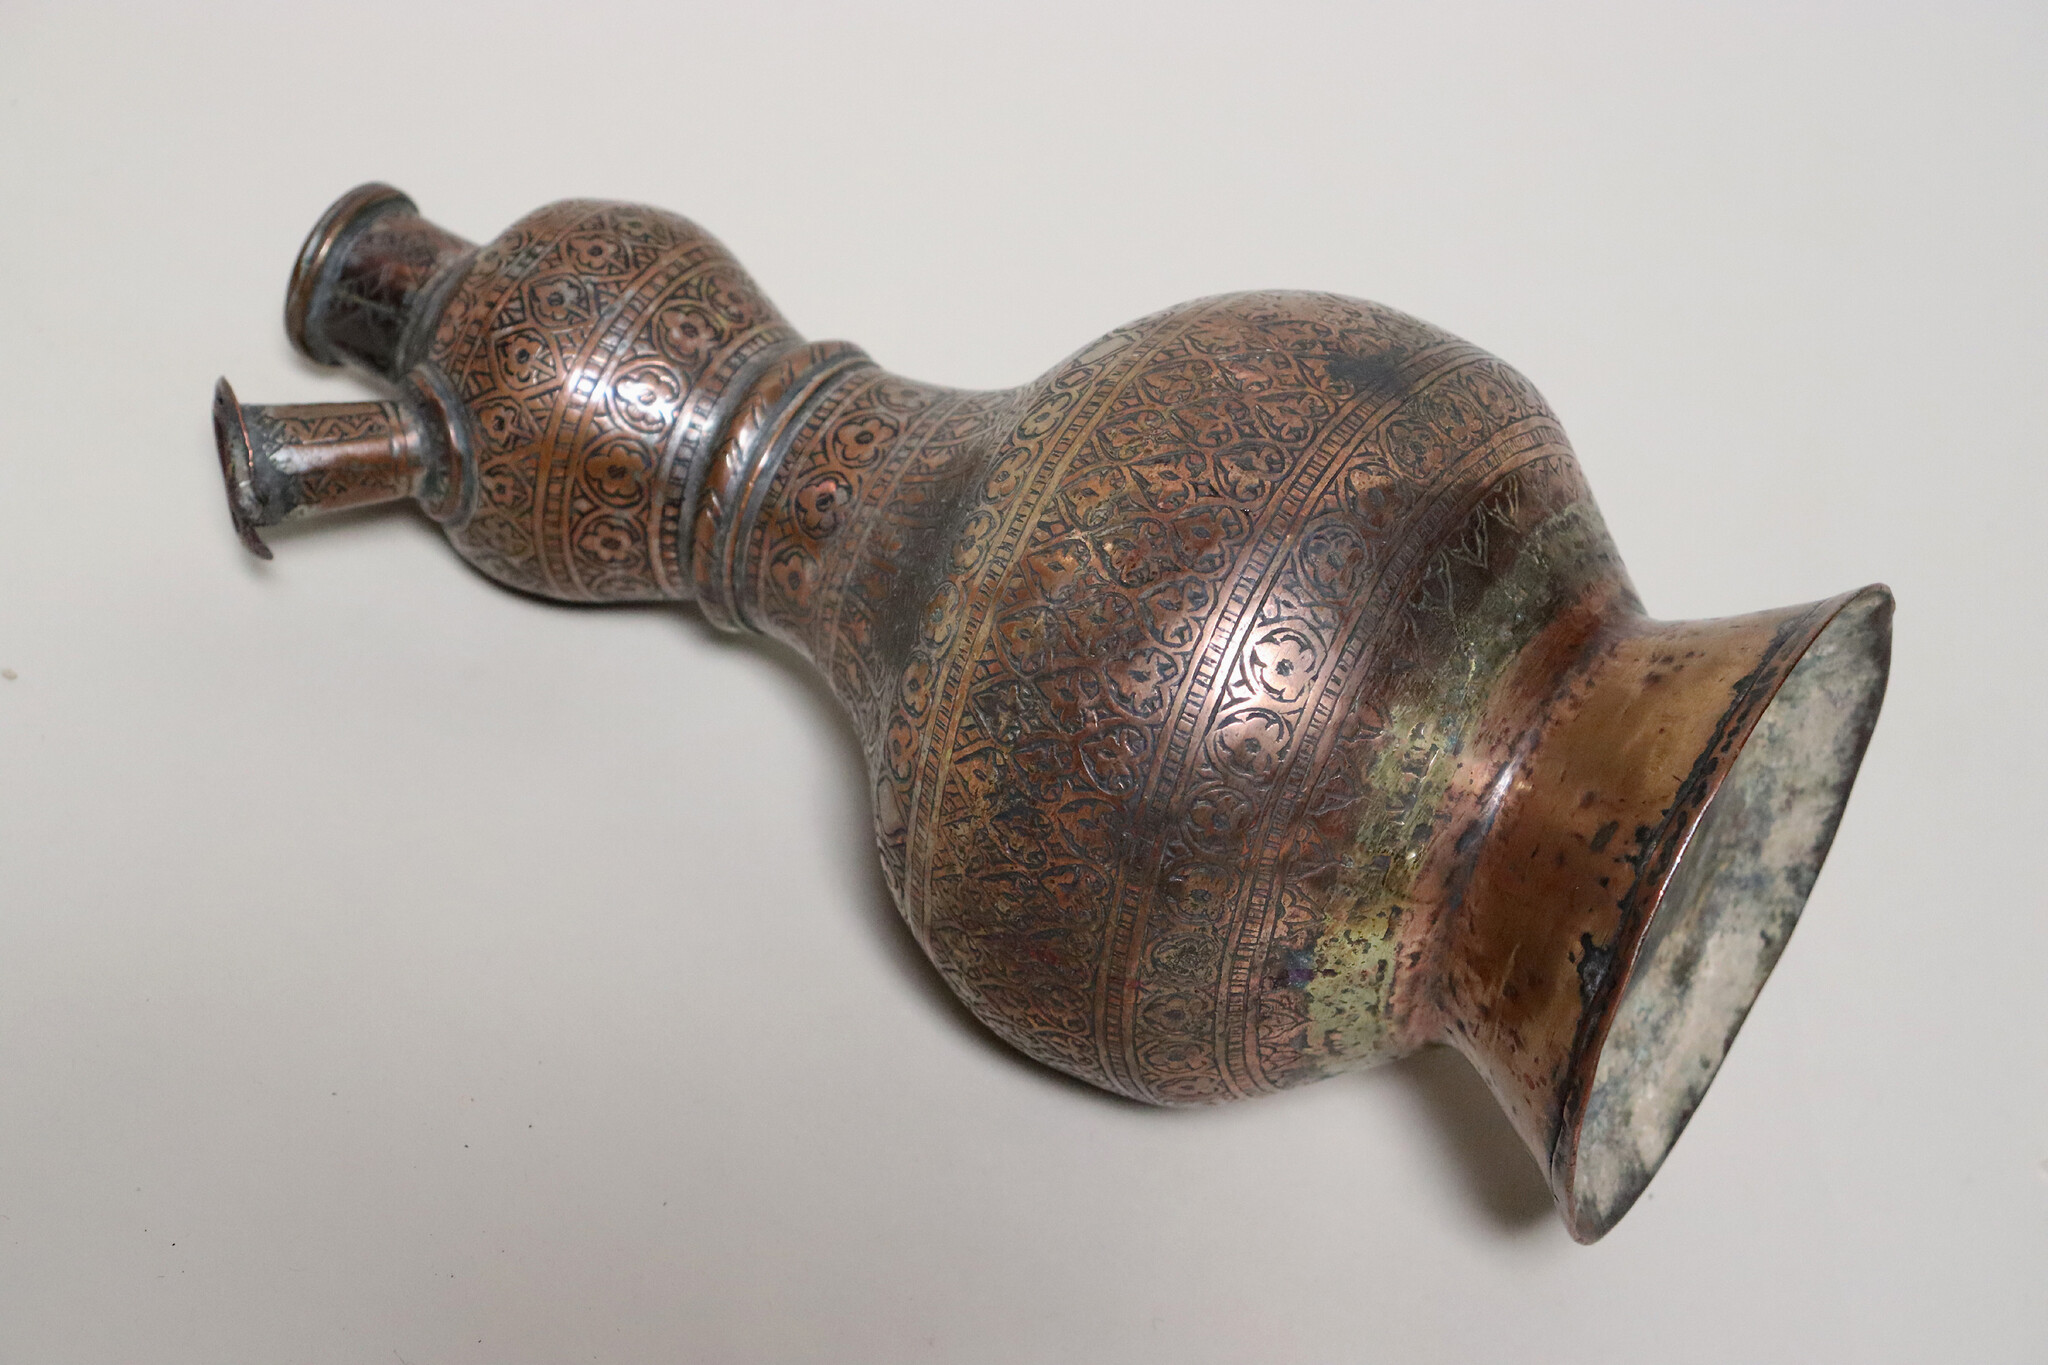 Antique Engraved copper Hookah Shisha hubble-bubble from Afghanistan No:23/14